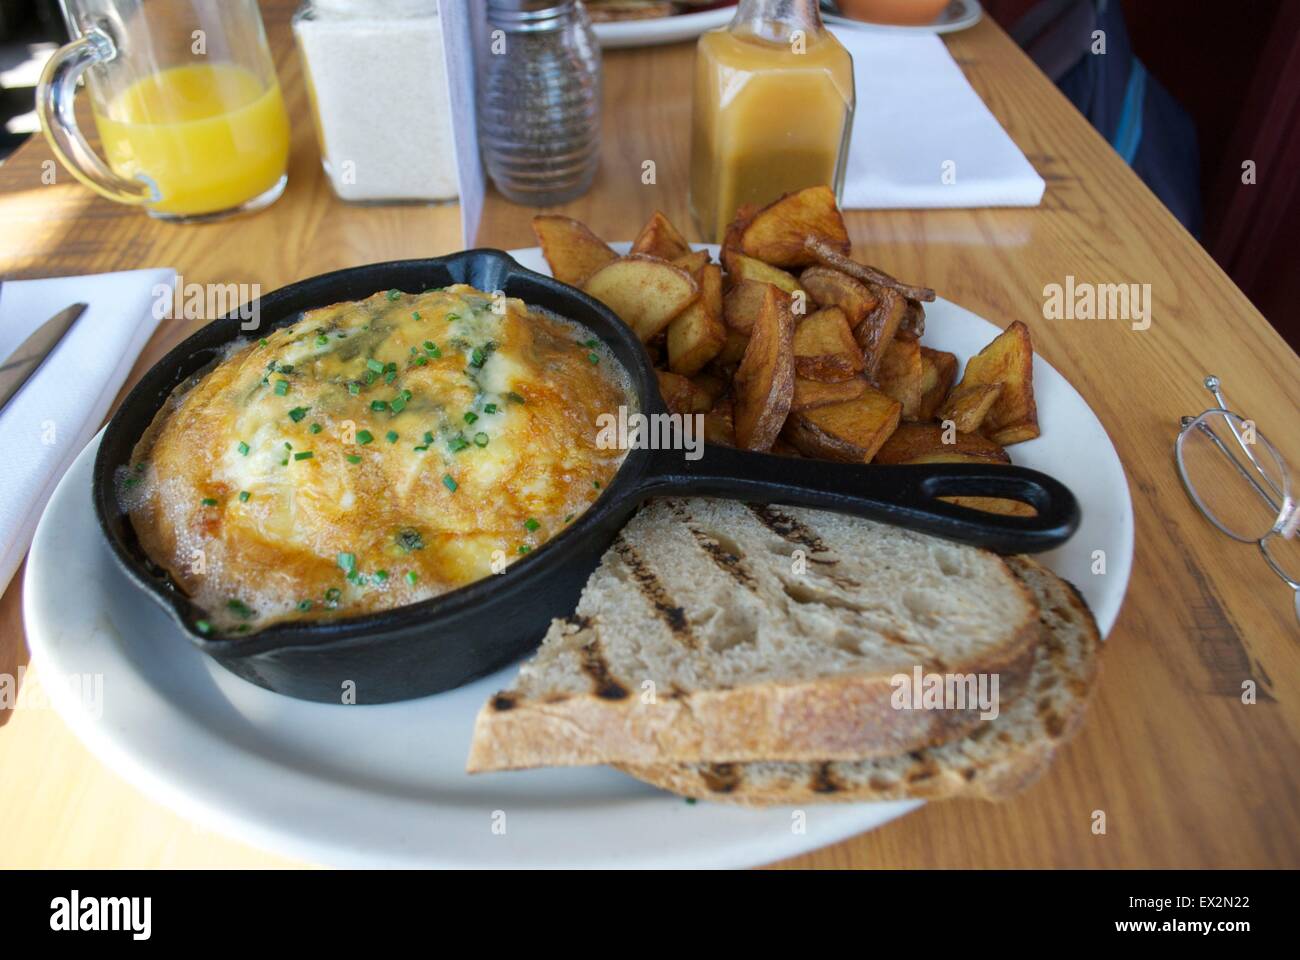 breakfast food Omlette and Fries Stock Photo